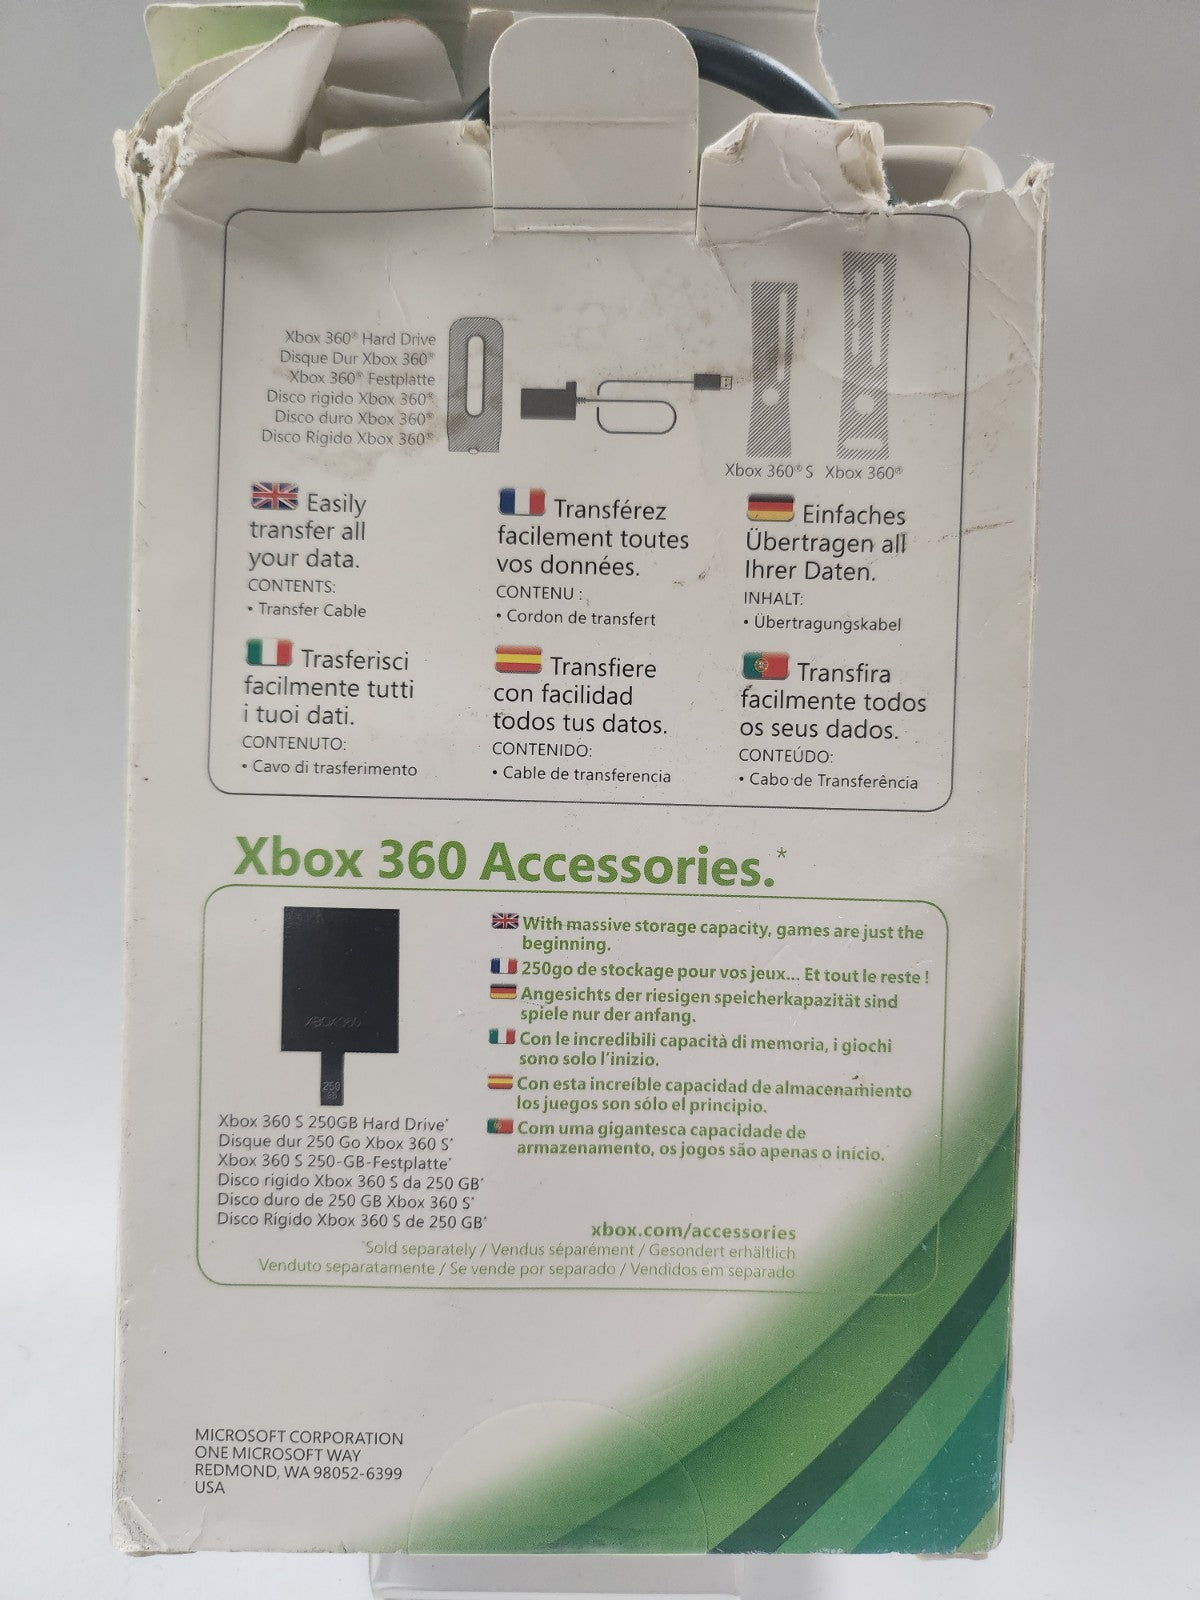 NIEUW Hard Drive Transfer Cable Xbox 360